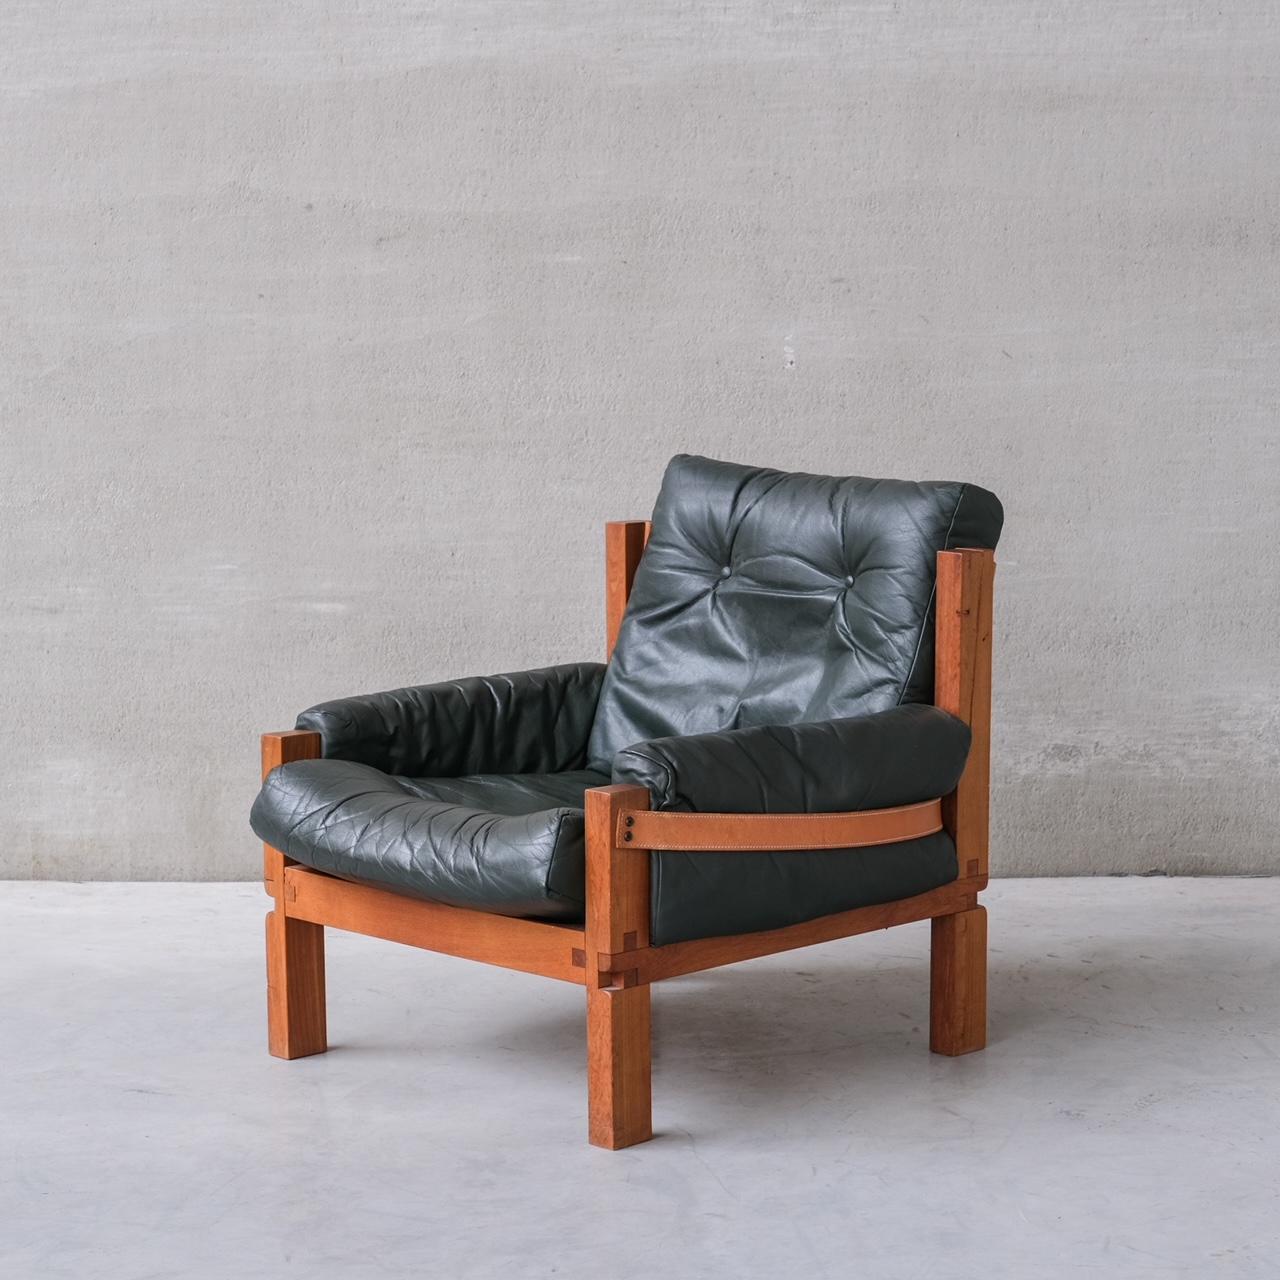 A pair of Pierre Chapo armchairs. 

S15 model. 

France, circa 1970s. 

Elm and leather. Exposed joints a signature of Chapo. 

Original leather cushions in green remain in good condition. 

Location: Belgium Gallery. 

Dimensions: 80 W